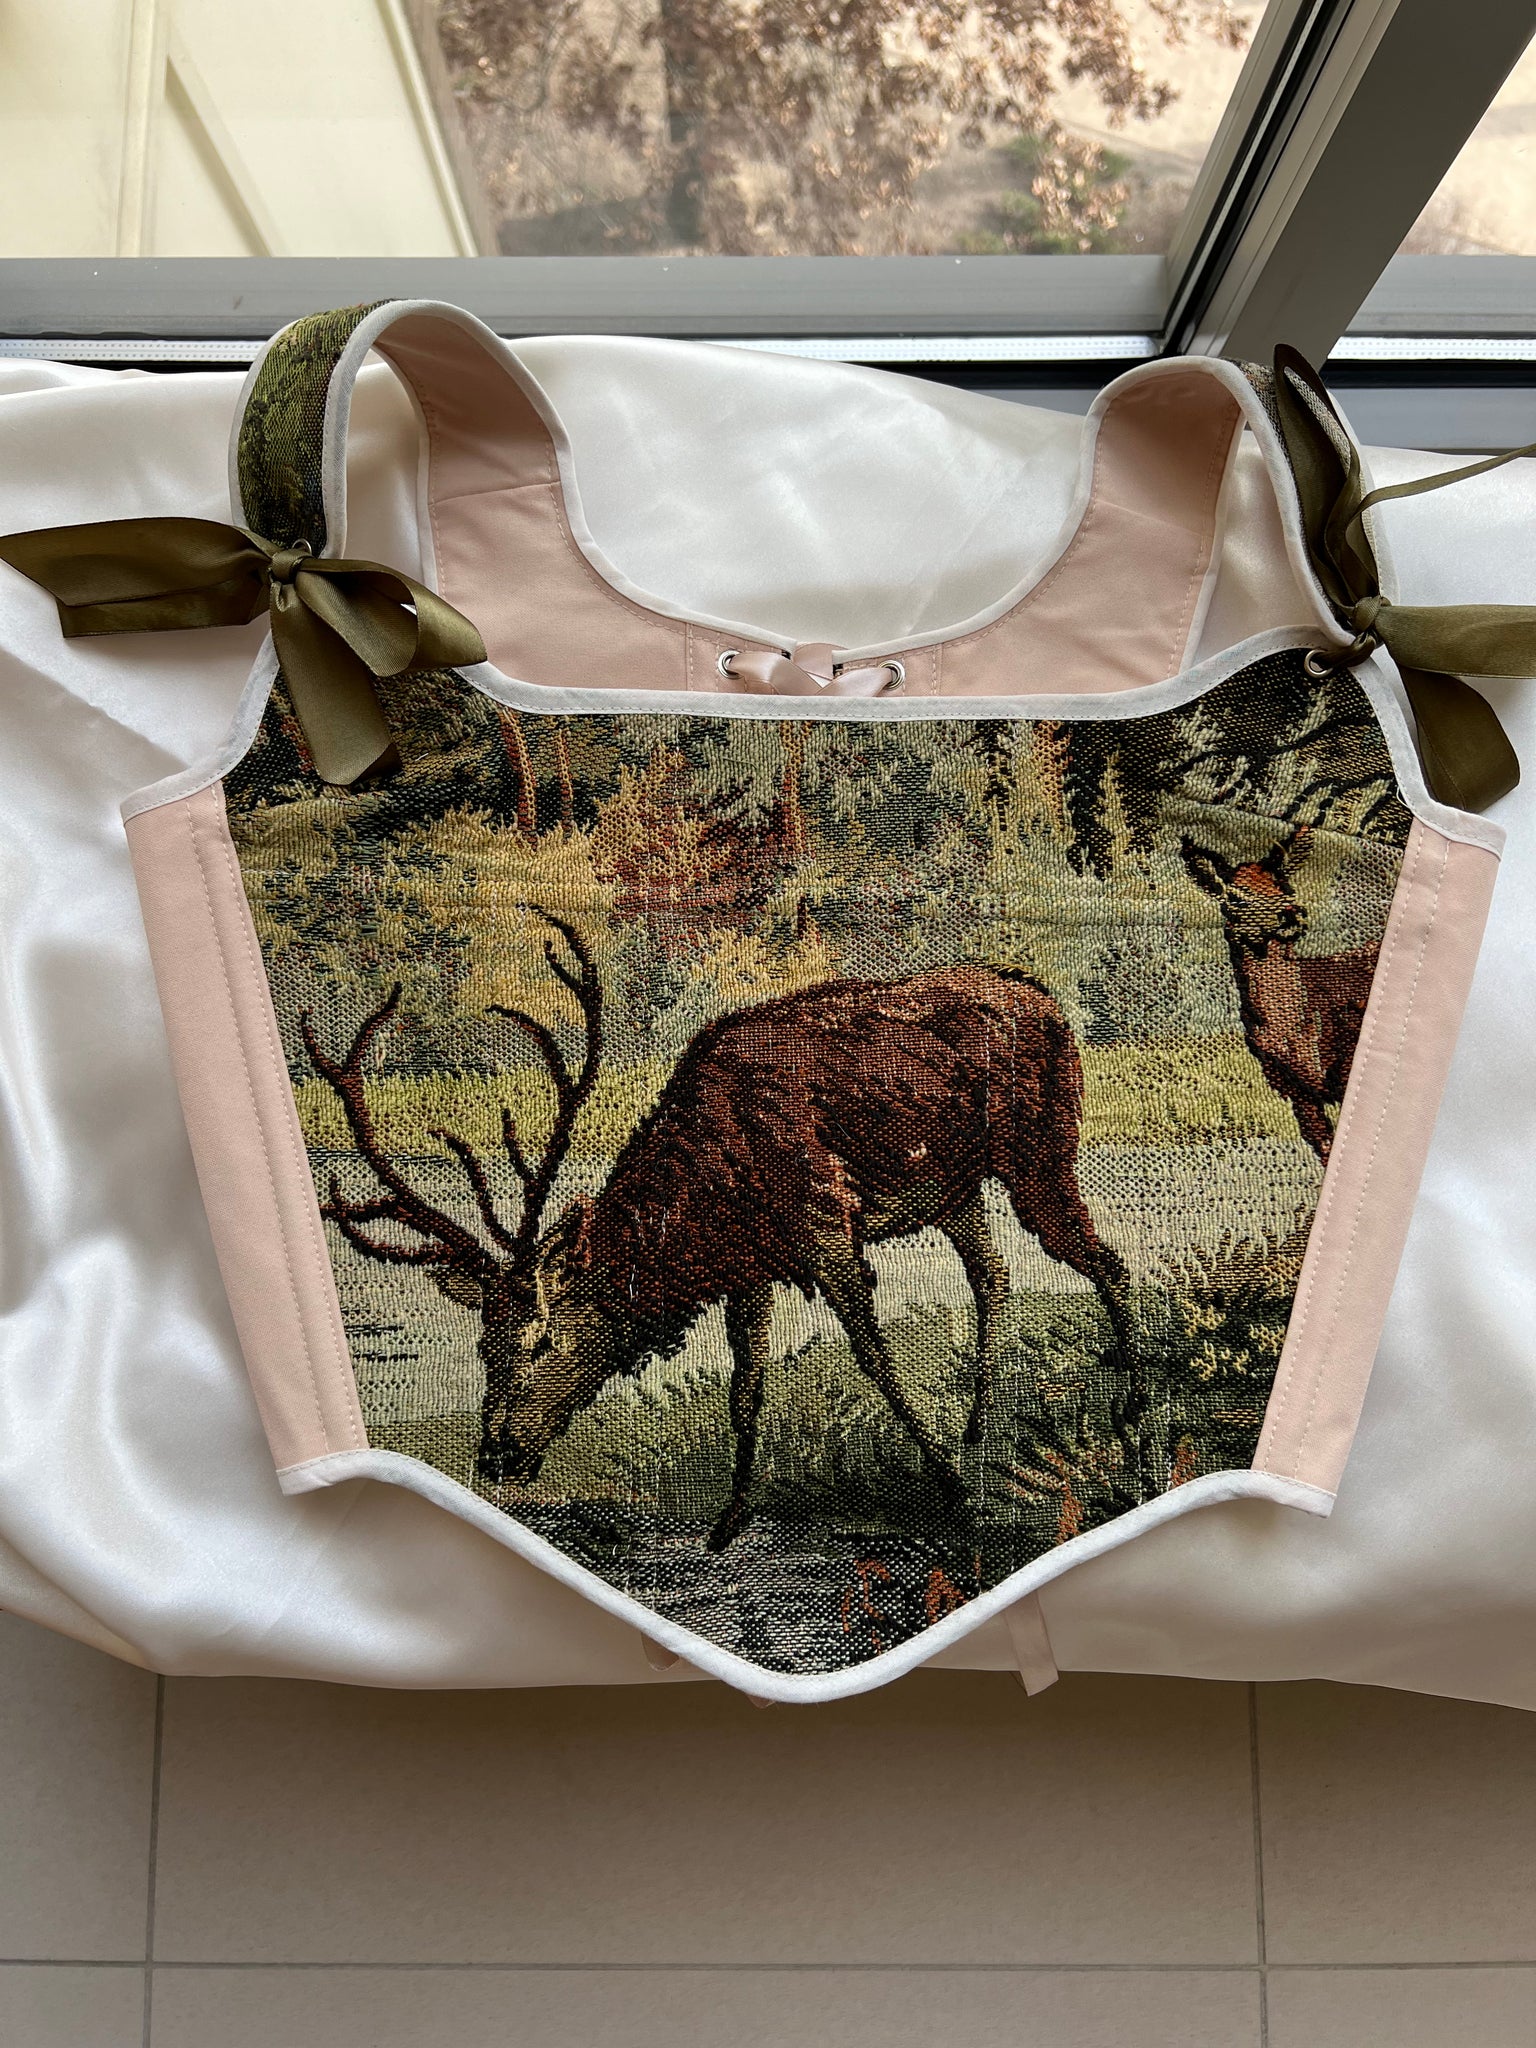 Lace-up Vintage Tapestry Corset Top, “Whitetail Deer at the Edge of a Forest Pond” Pattern, Size S-M (US 4-8)